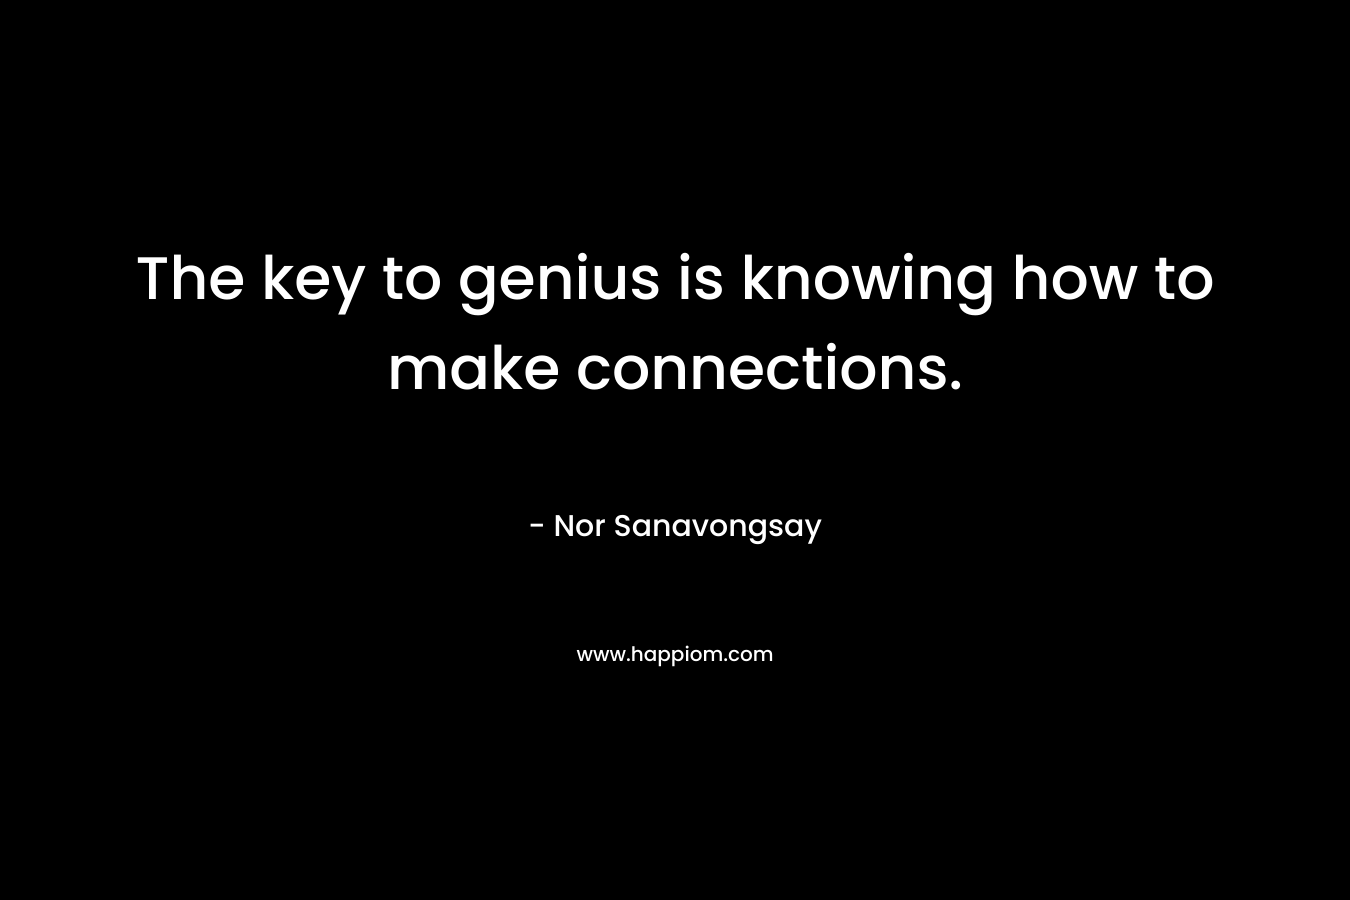 The key to genius is knowing how to make connections.